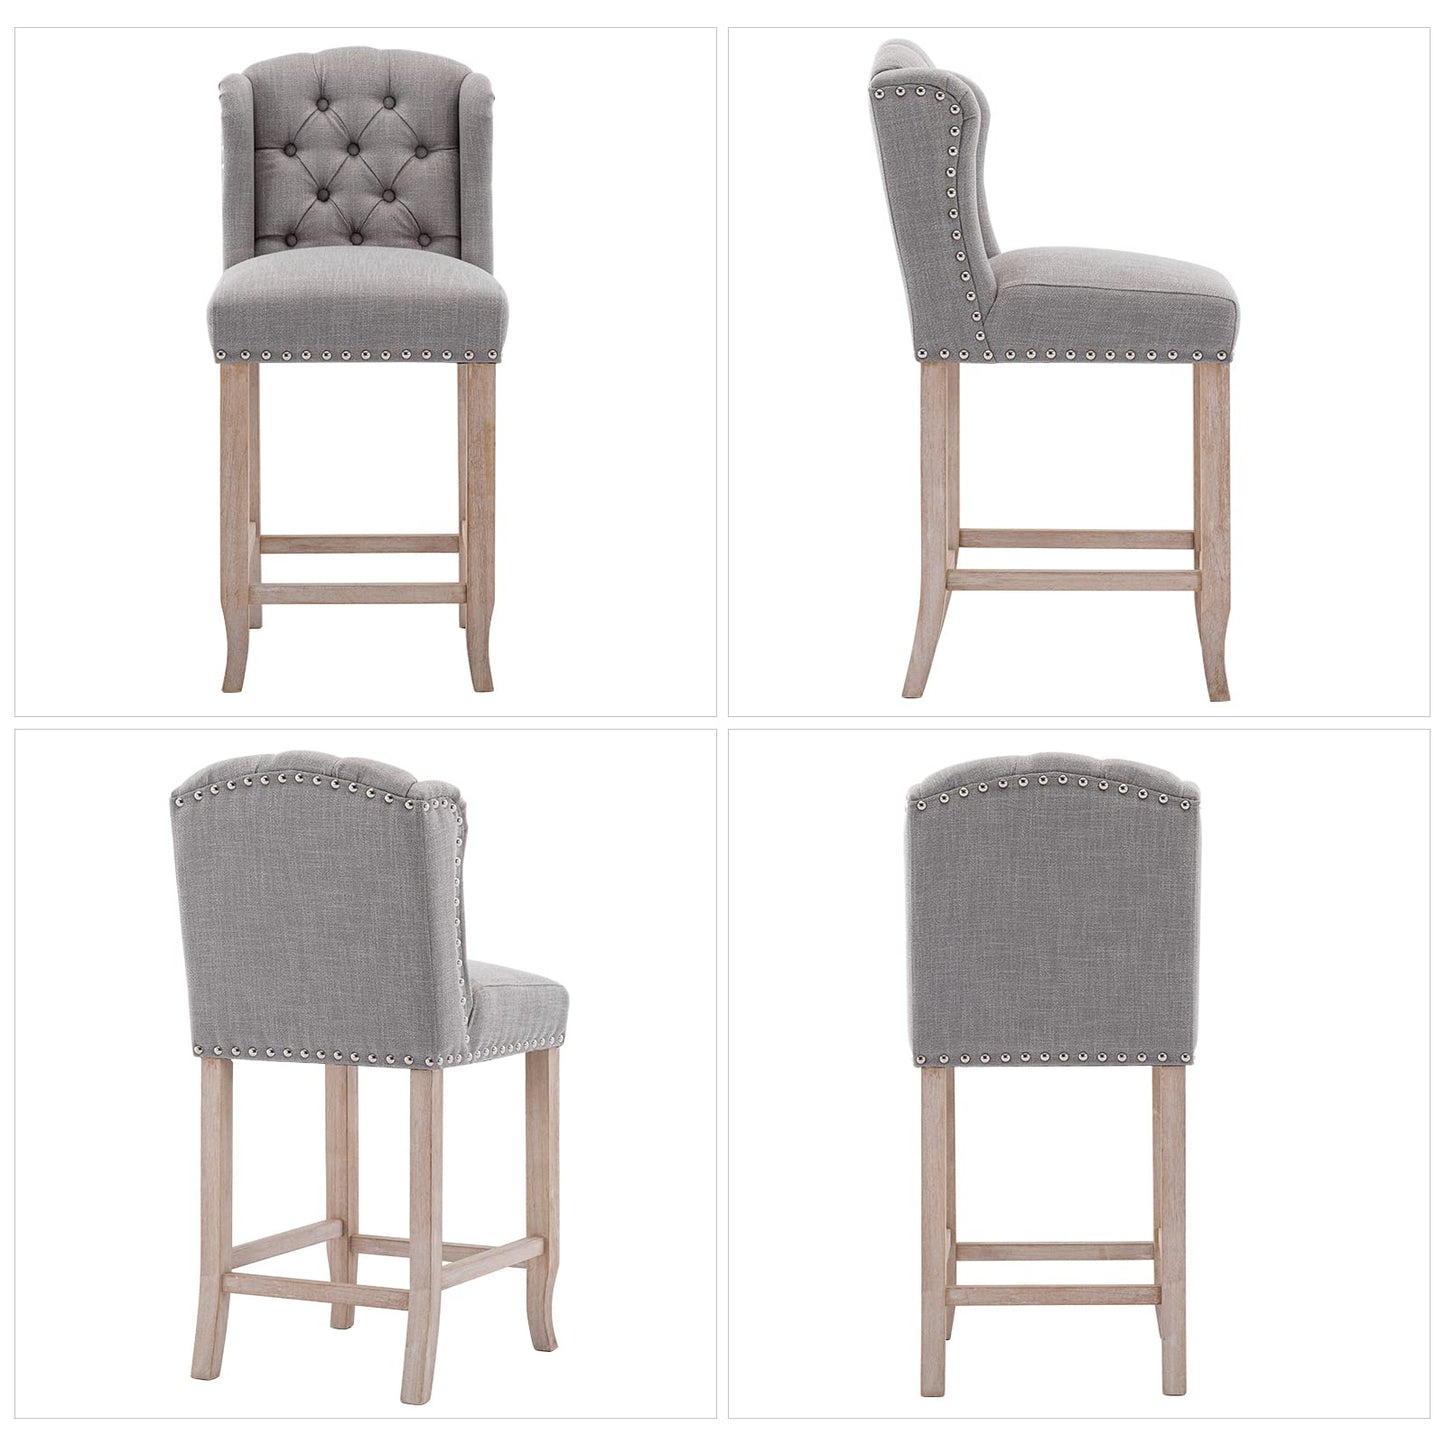 DUOMAY Tufted 26 Inch Counter Height Bar Stools Set of 2, Linen Fabric Counter Chairs with Back, Armless Barstools Breakfast Stools W/Solid Wood Legs for Kitchen Island Lounge Pub Bar, Grey